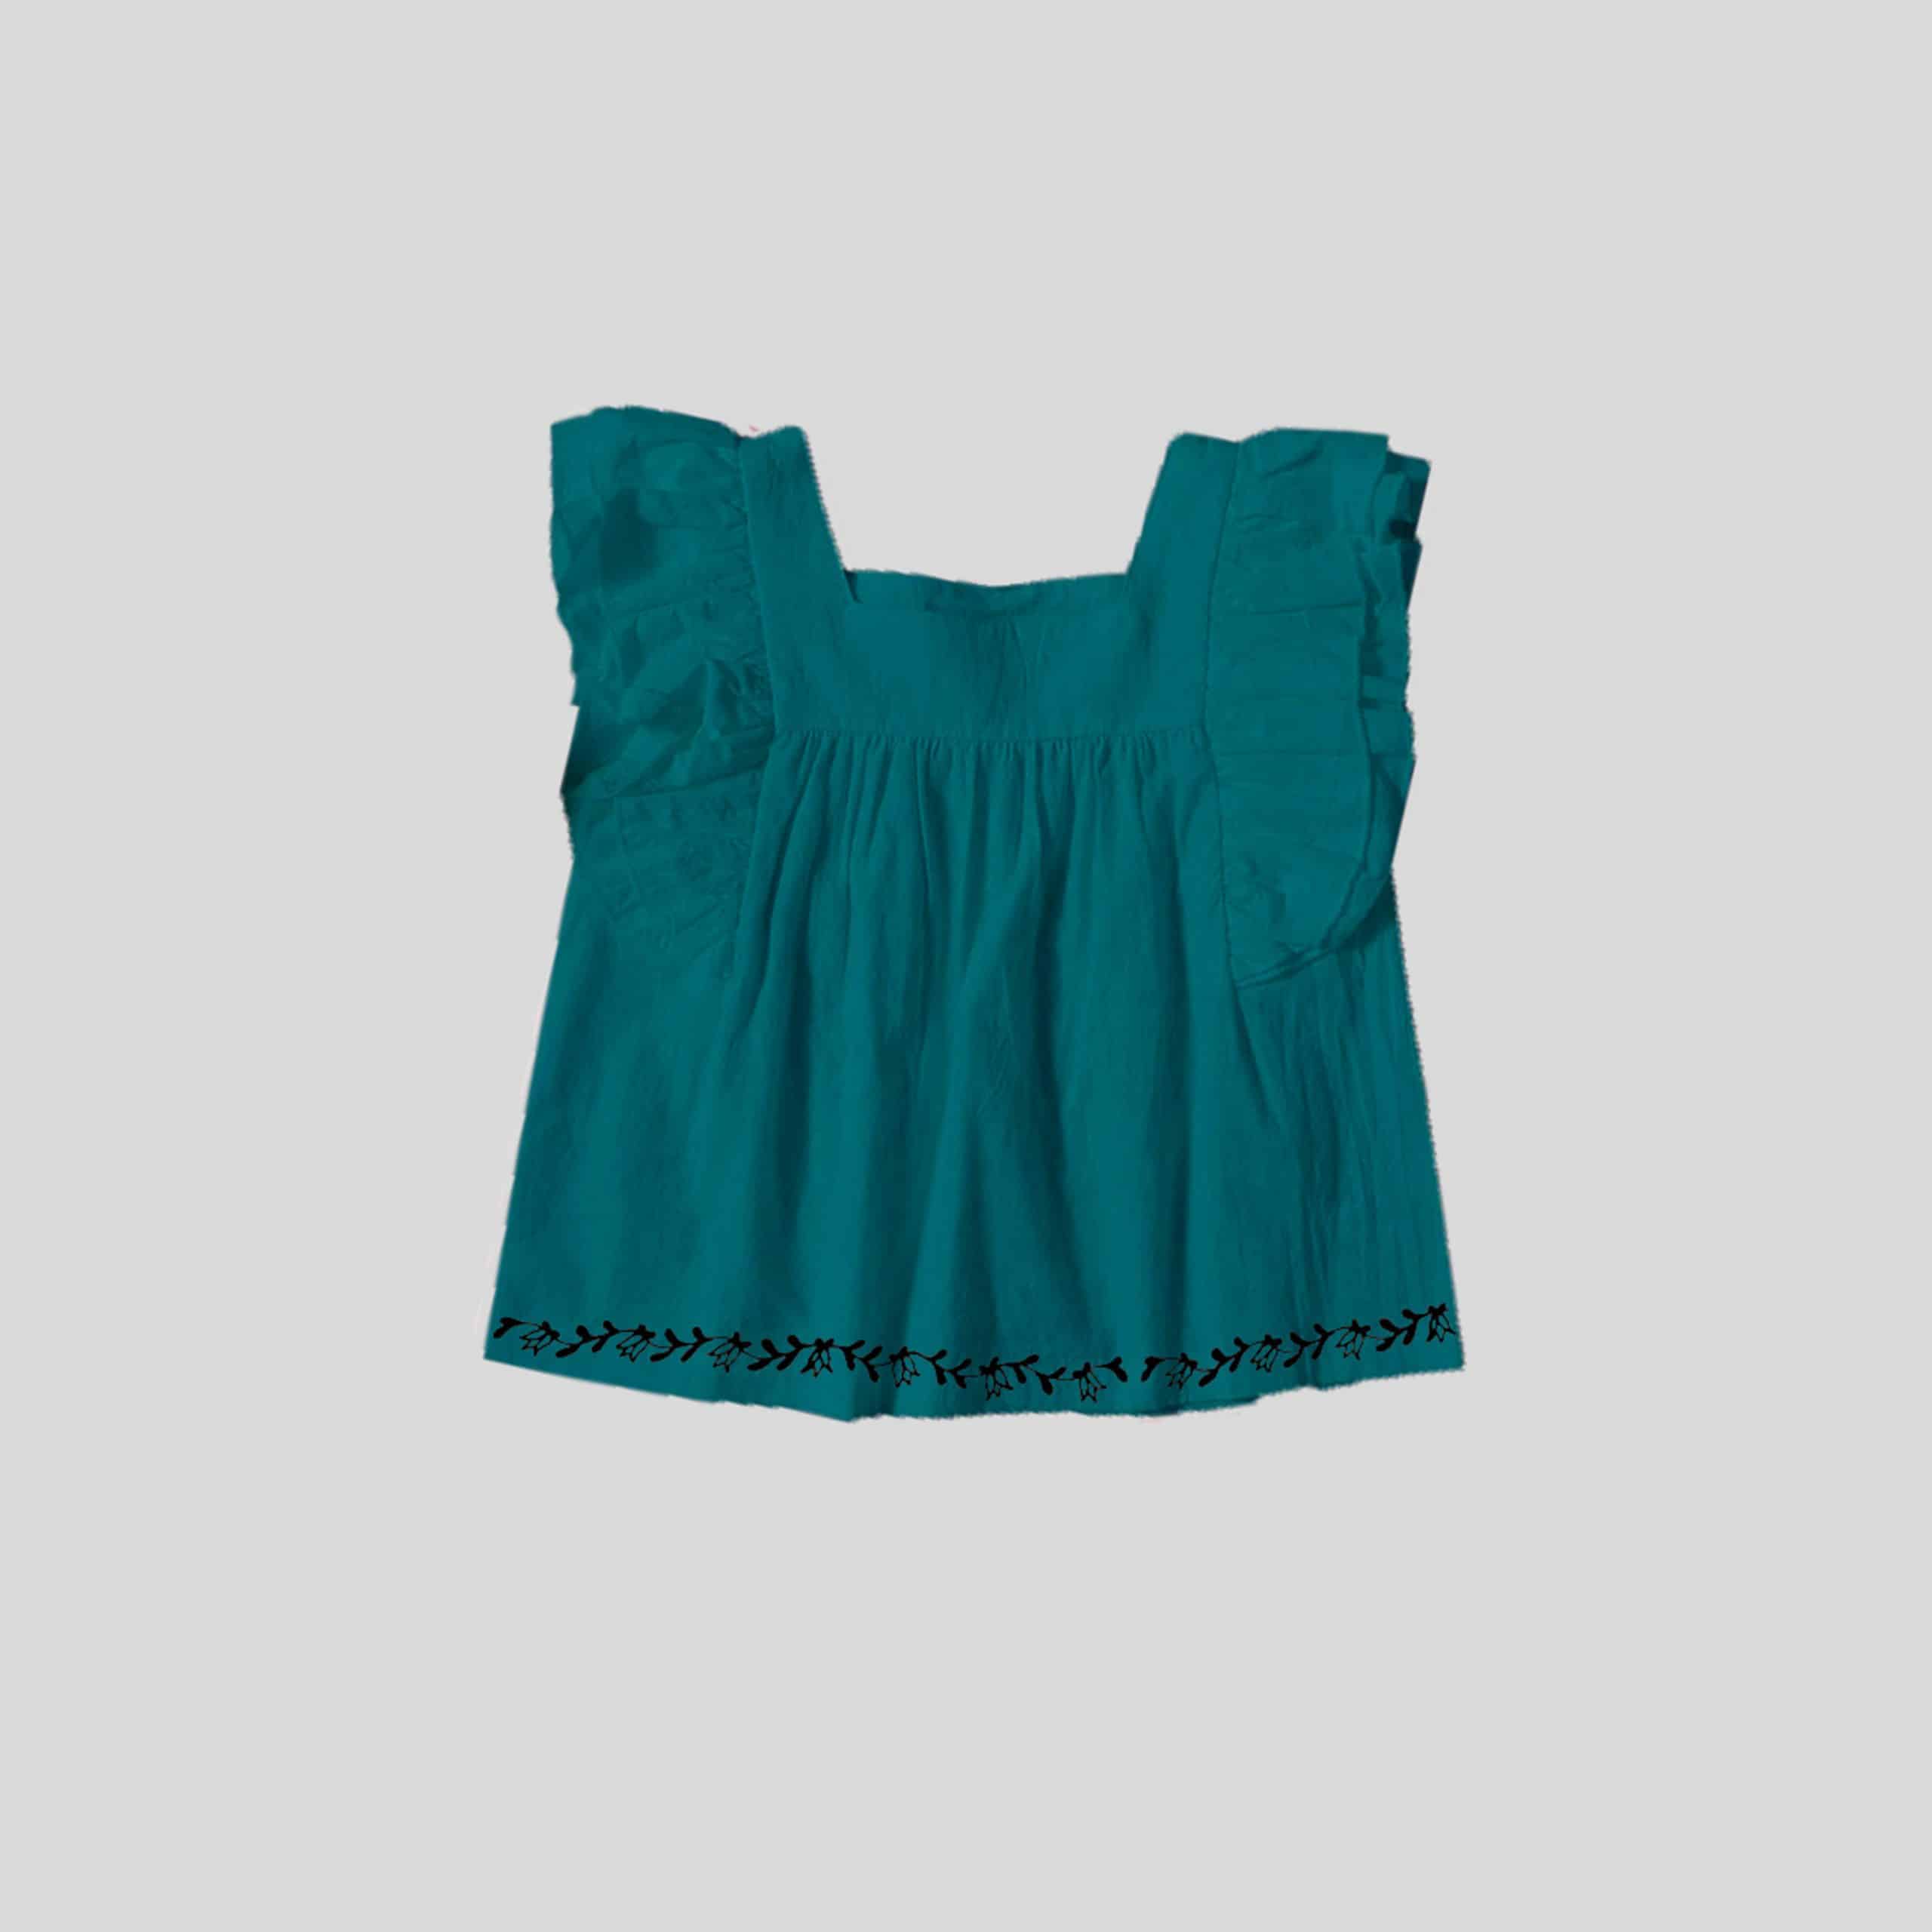 Girls Green Frill Top with Cute Print - RKFCW325